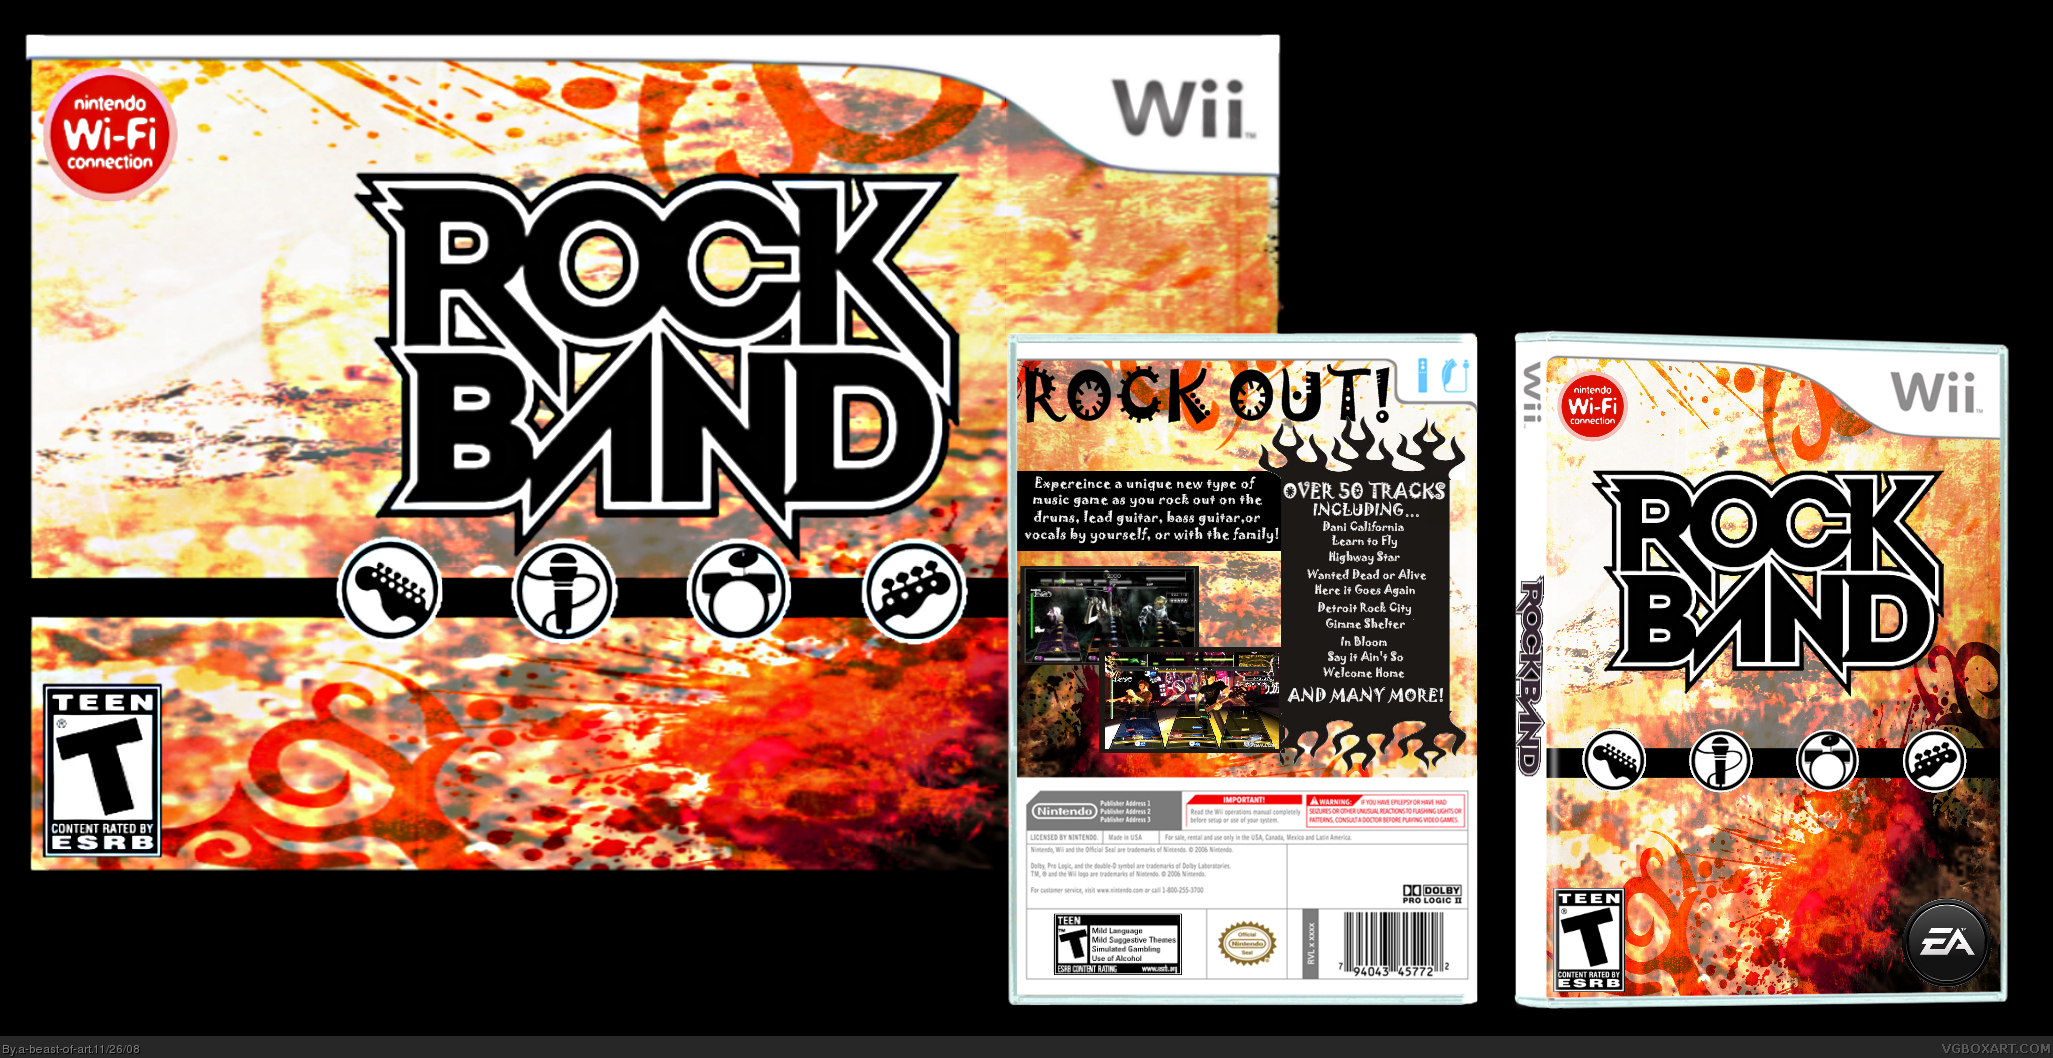 download rock band 4 band in a box for free